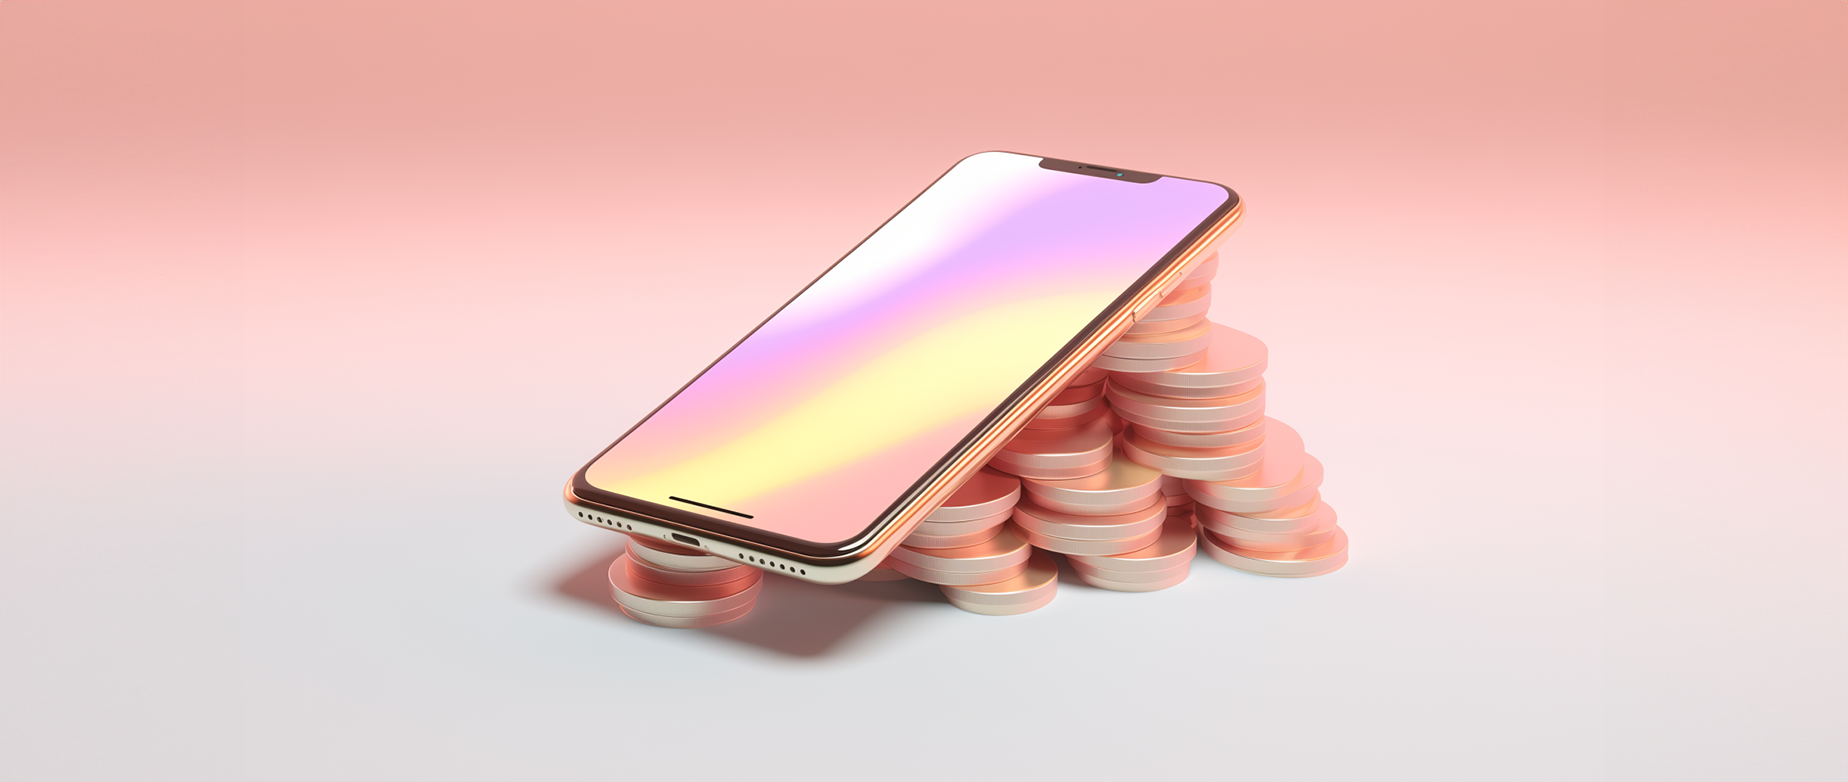 Face up smart phone laying on a stack of coins on a pink background: make money from your phone